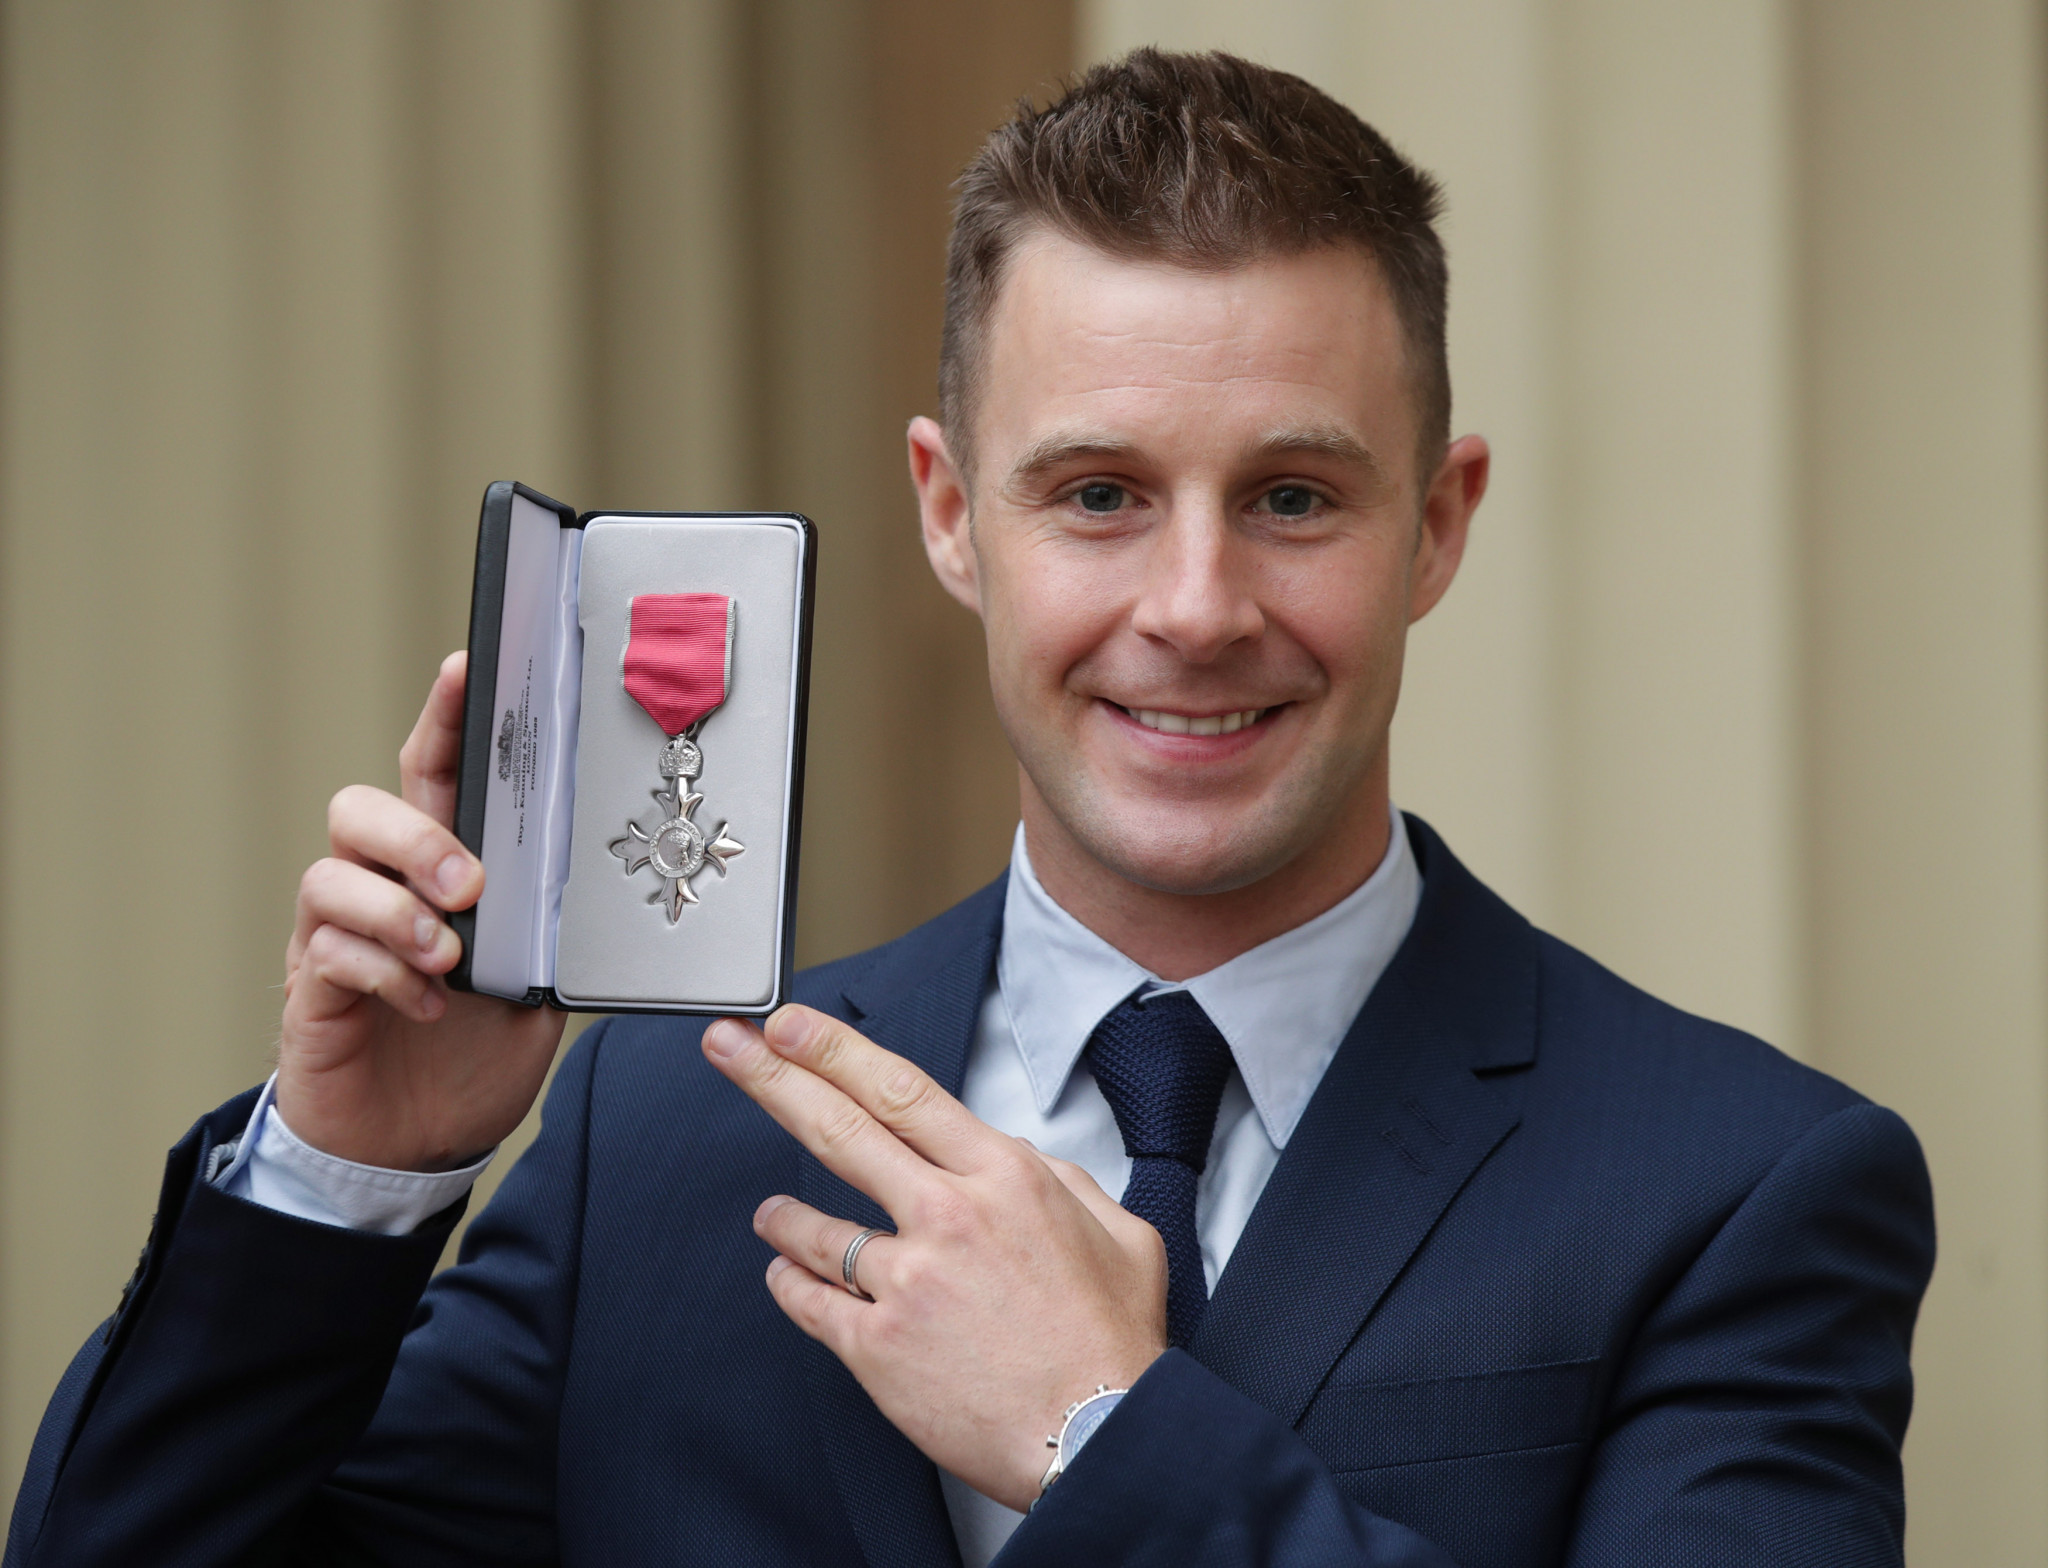 Superbike world champion Jonathan Rea. Who? Rea came a surprise second in the BBC poll and it wasn't his only success this year as he poses after being presented with an MBE by the Duke of Cambridge at Buckingham Palace last month ©Getty Images